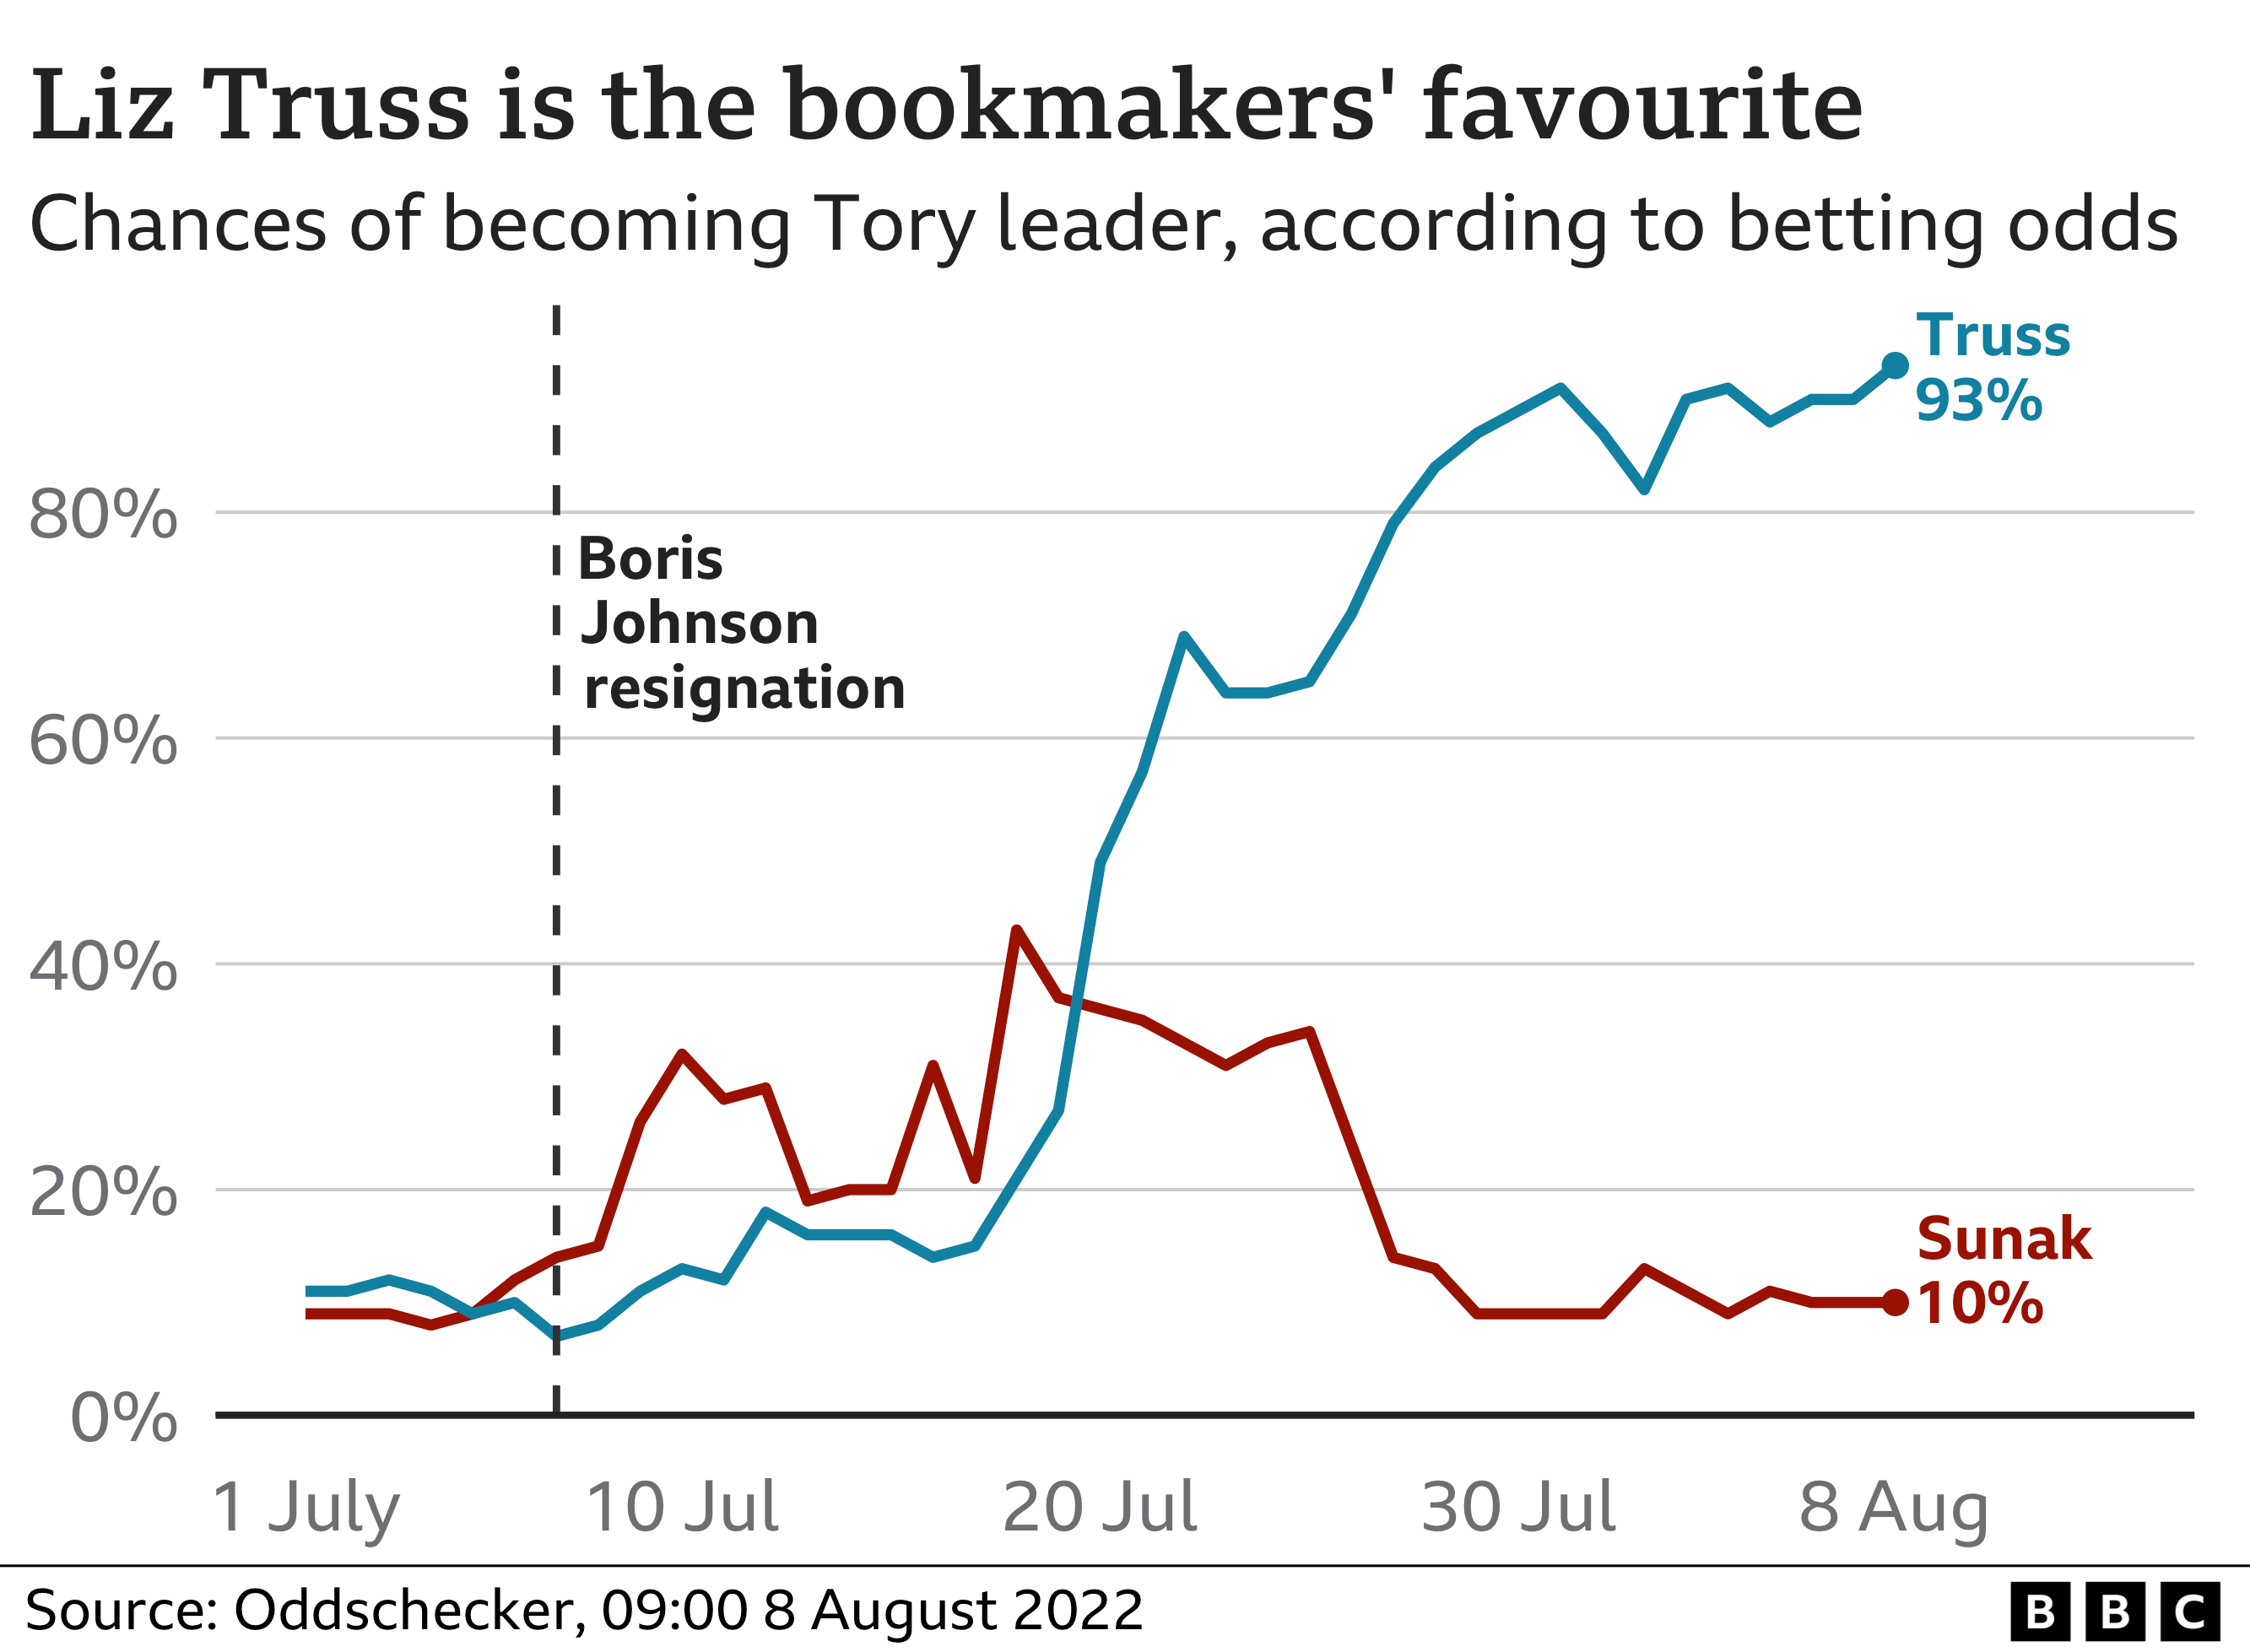 BBC graphic showing latest odds on Tory leadership contest